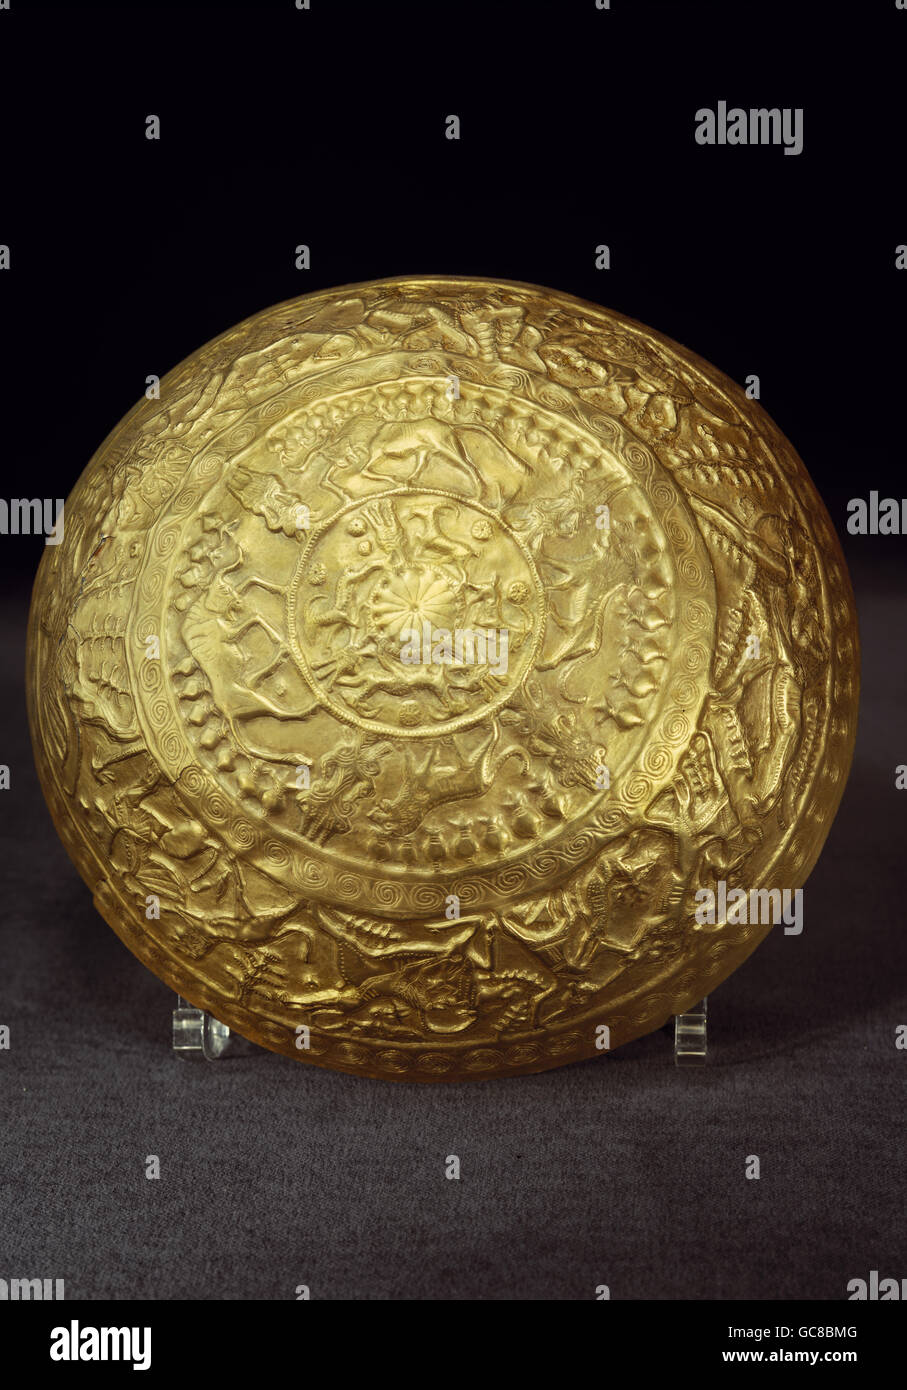 fine arts, ancient world, Syria, sculpture, bowl, gold, Ugarit, 14th century BC, Aleppo National Museum, Stock Photo